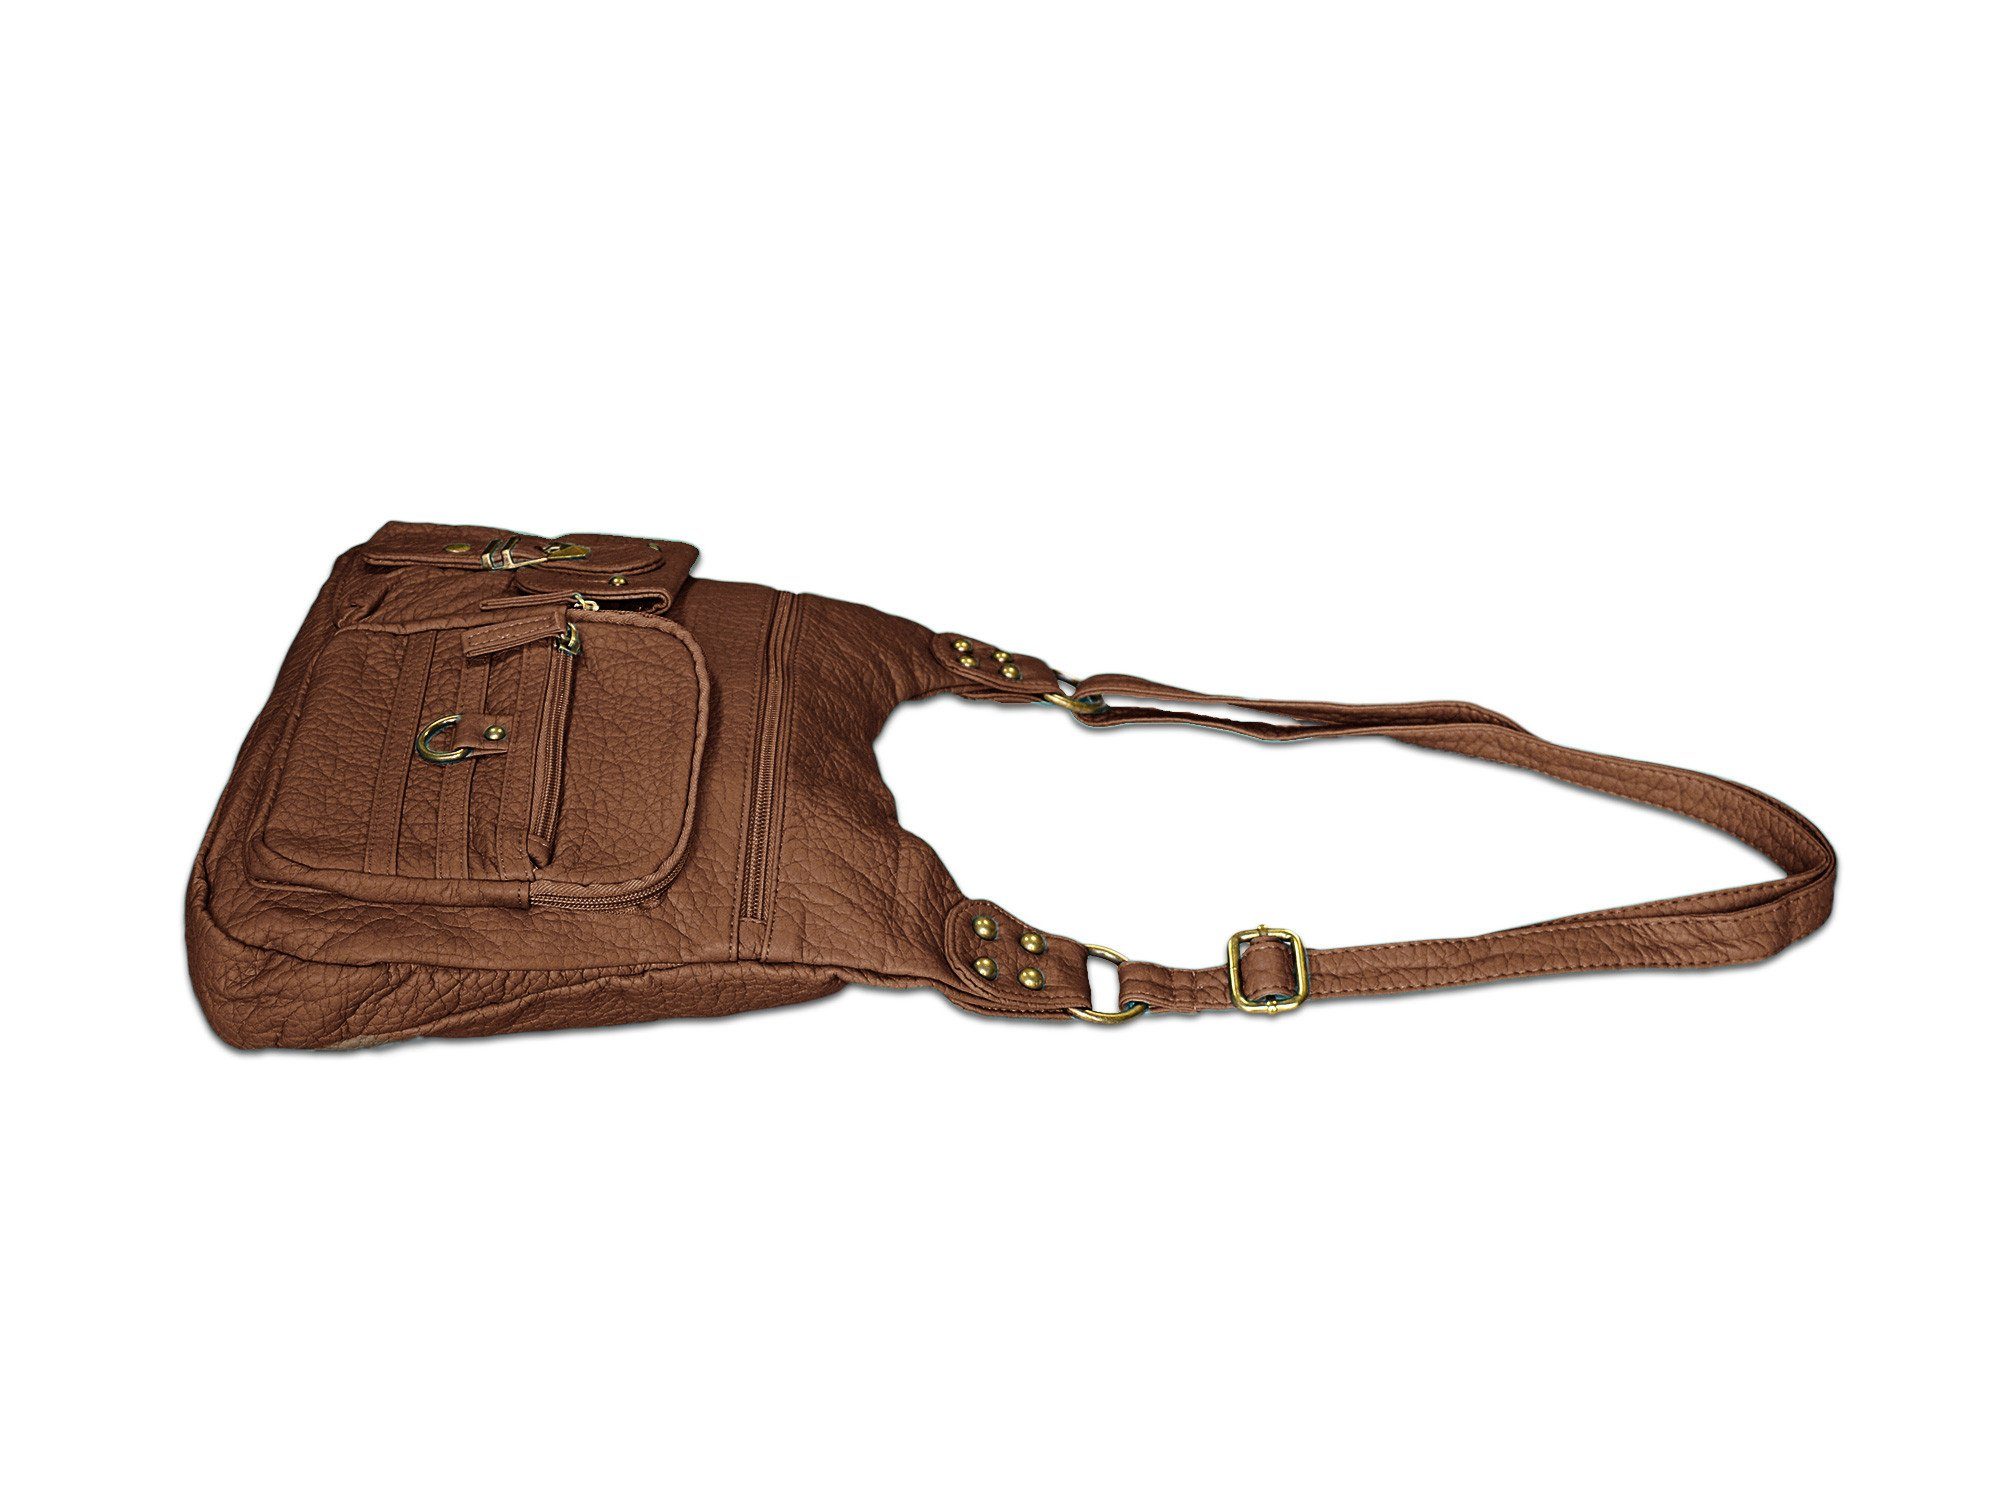 Washable Vegan Leather Series - Casual Messenger Bags - Brown